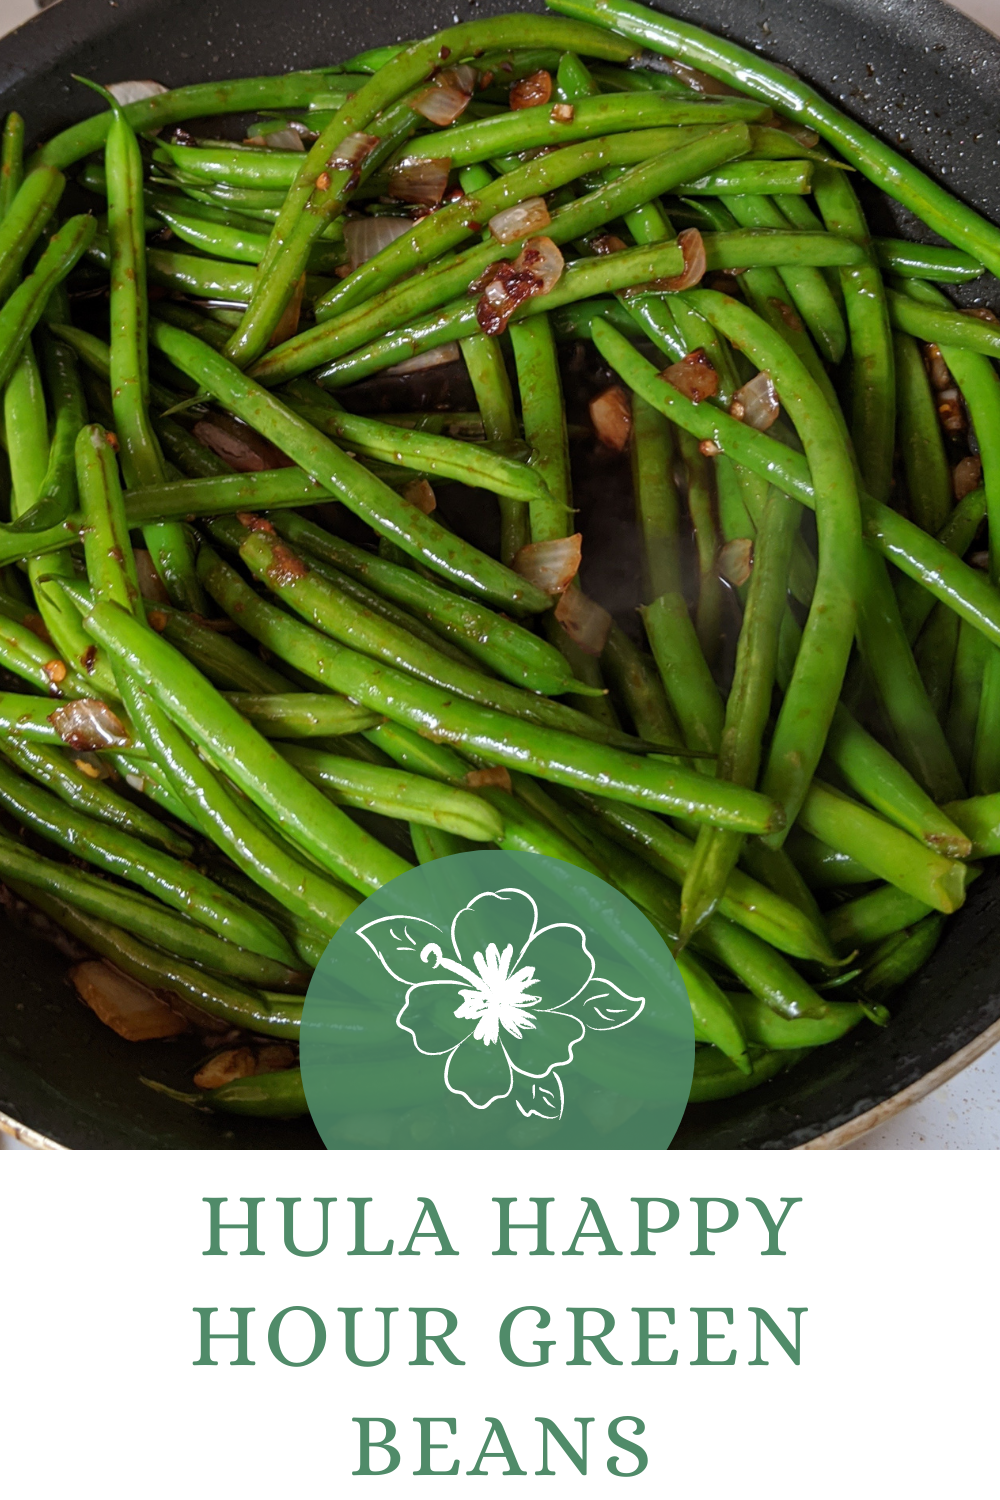 Sweet and tangy Asian flavor meets French beans in this delicious green bean recipe.